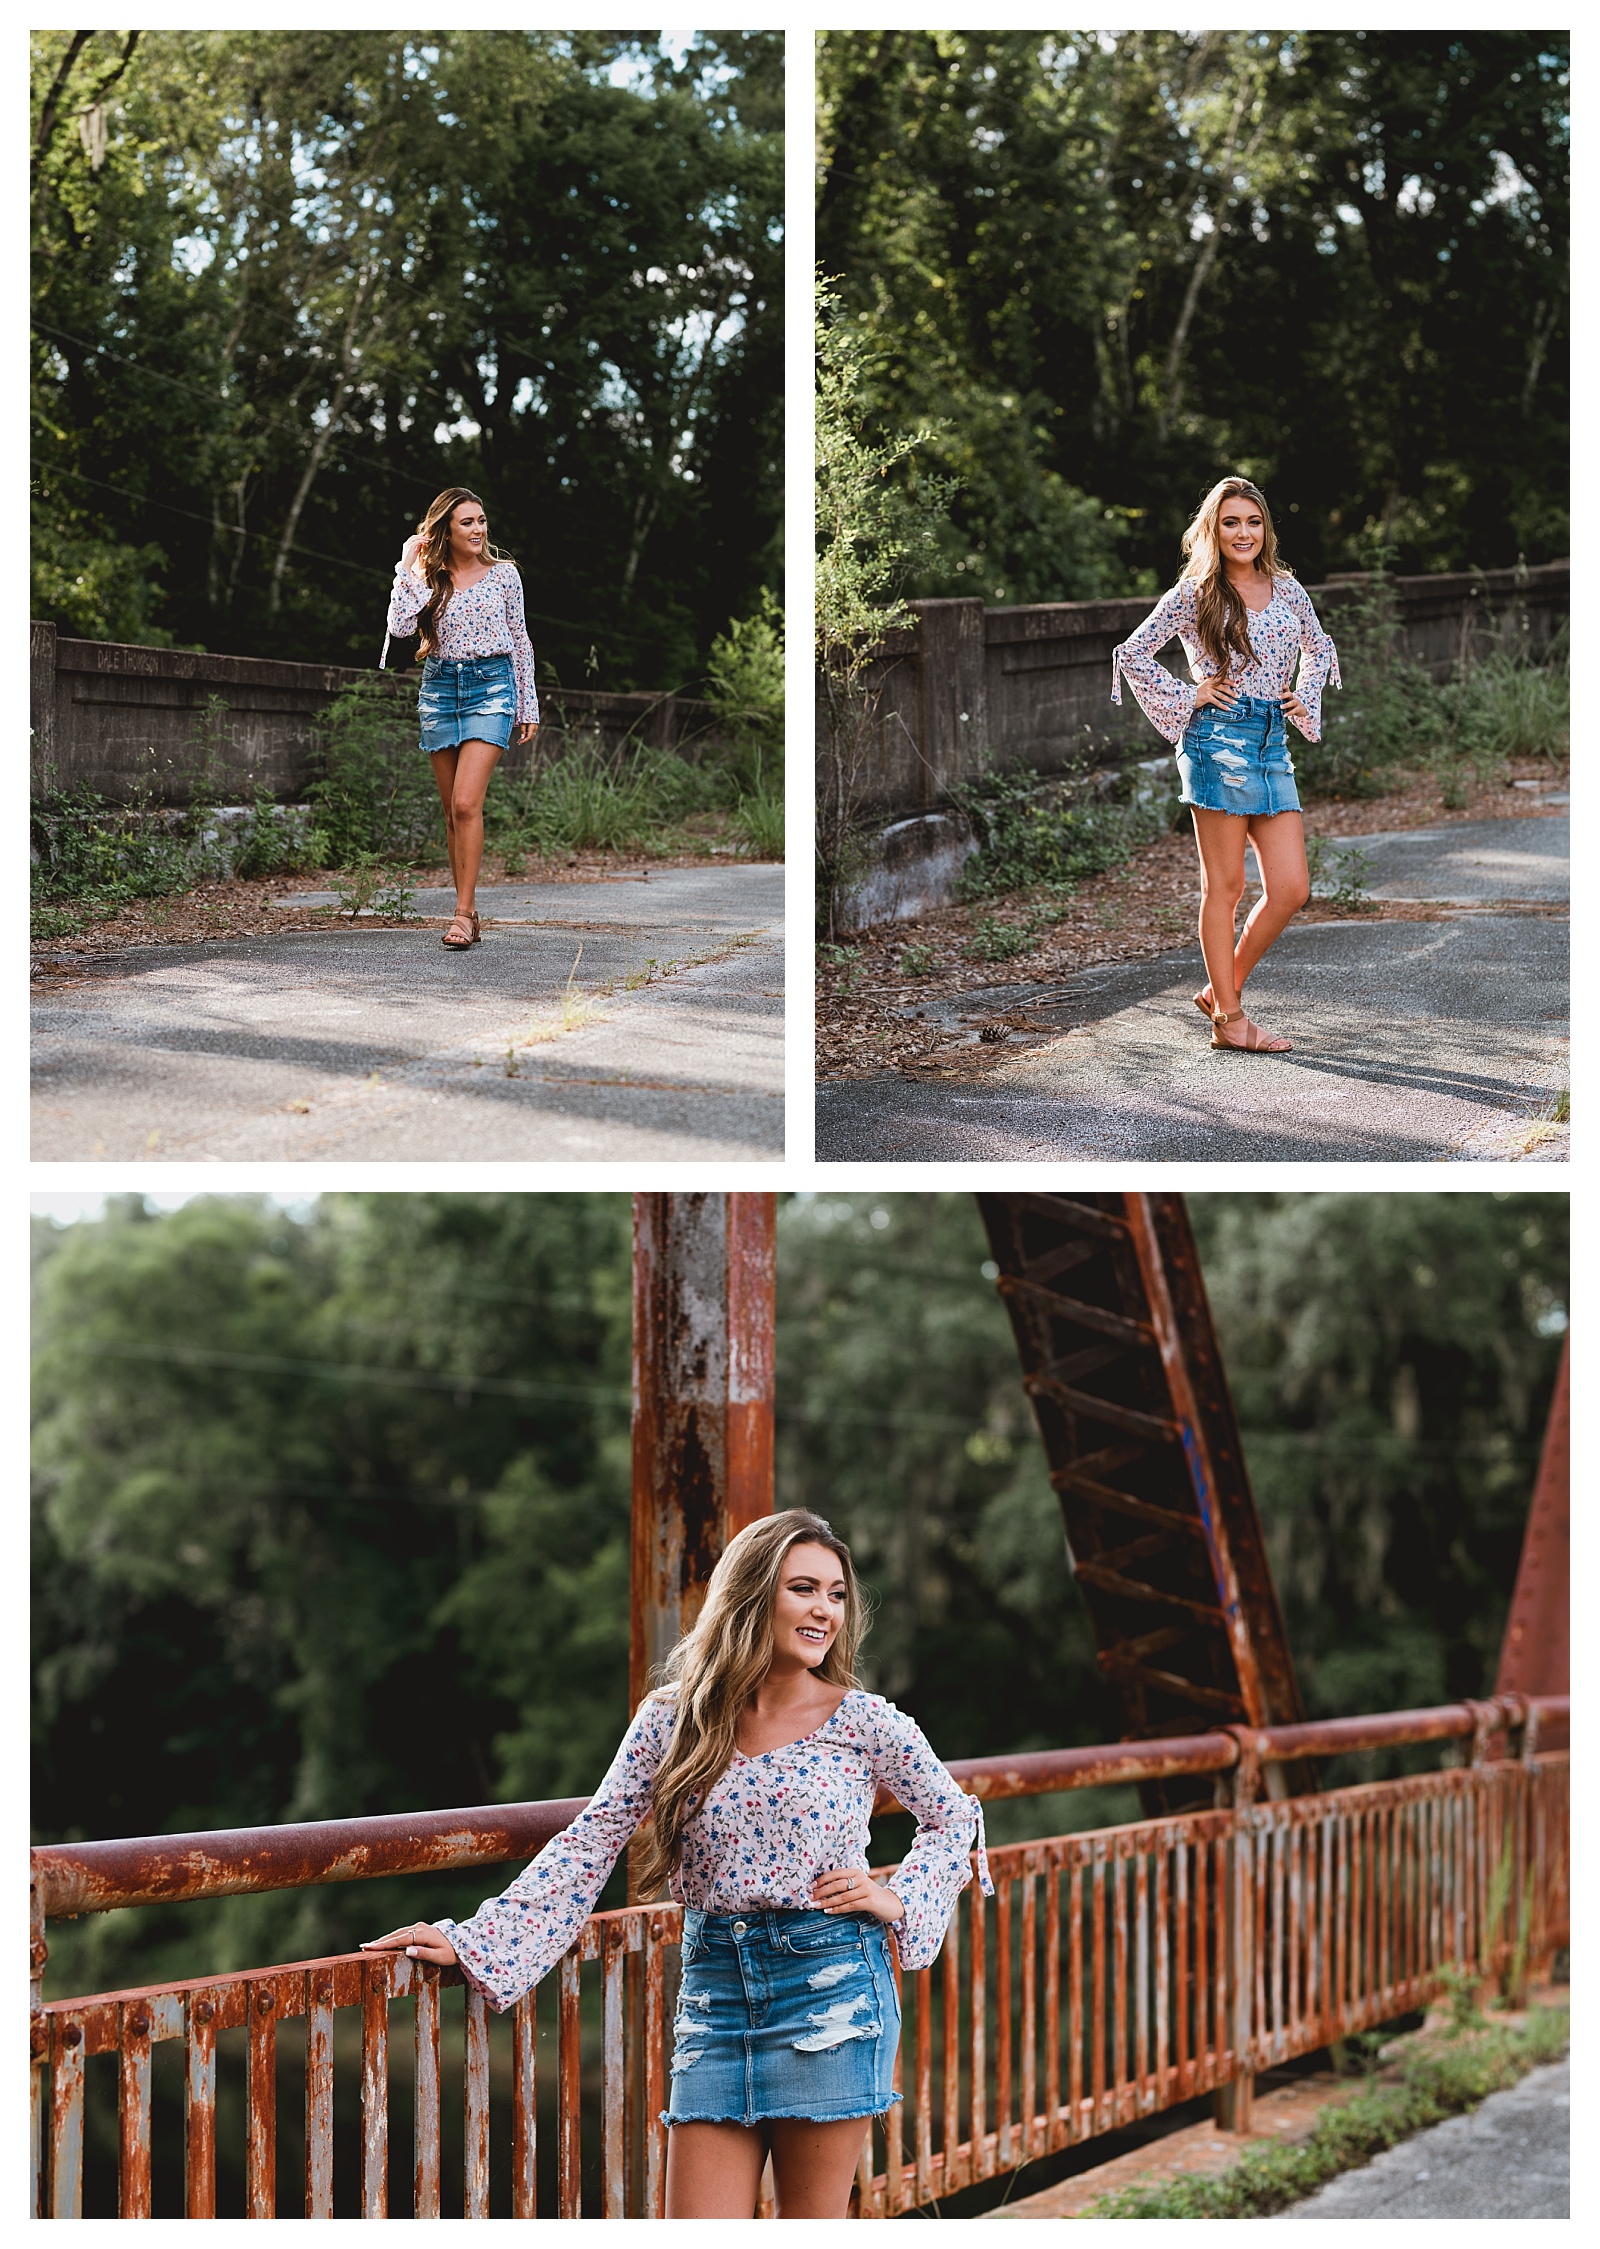 Old bridge senior pictures in North Florida | Shelly Williams Photography